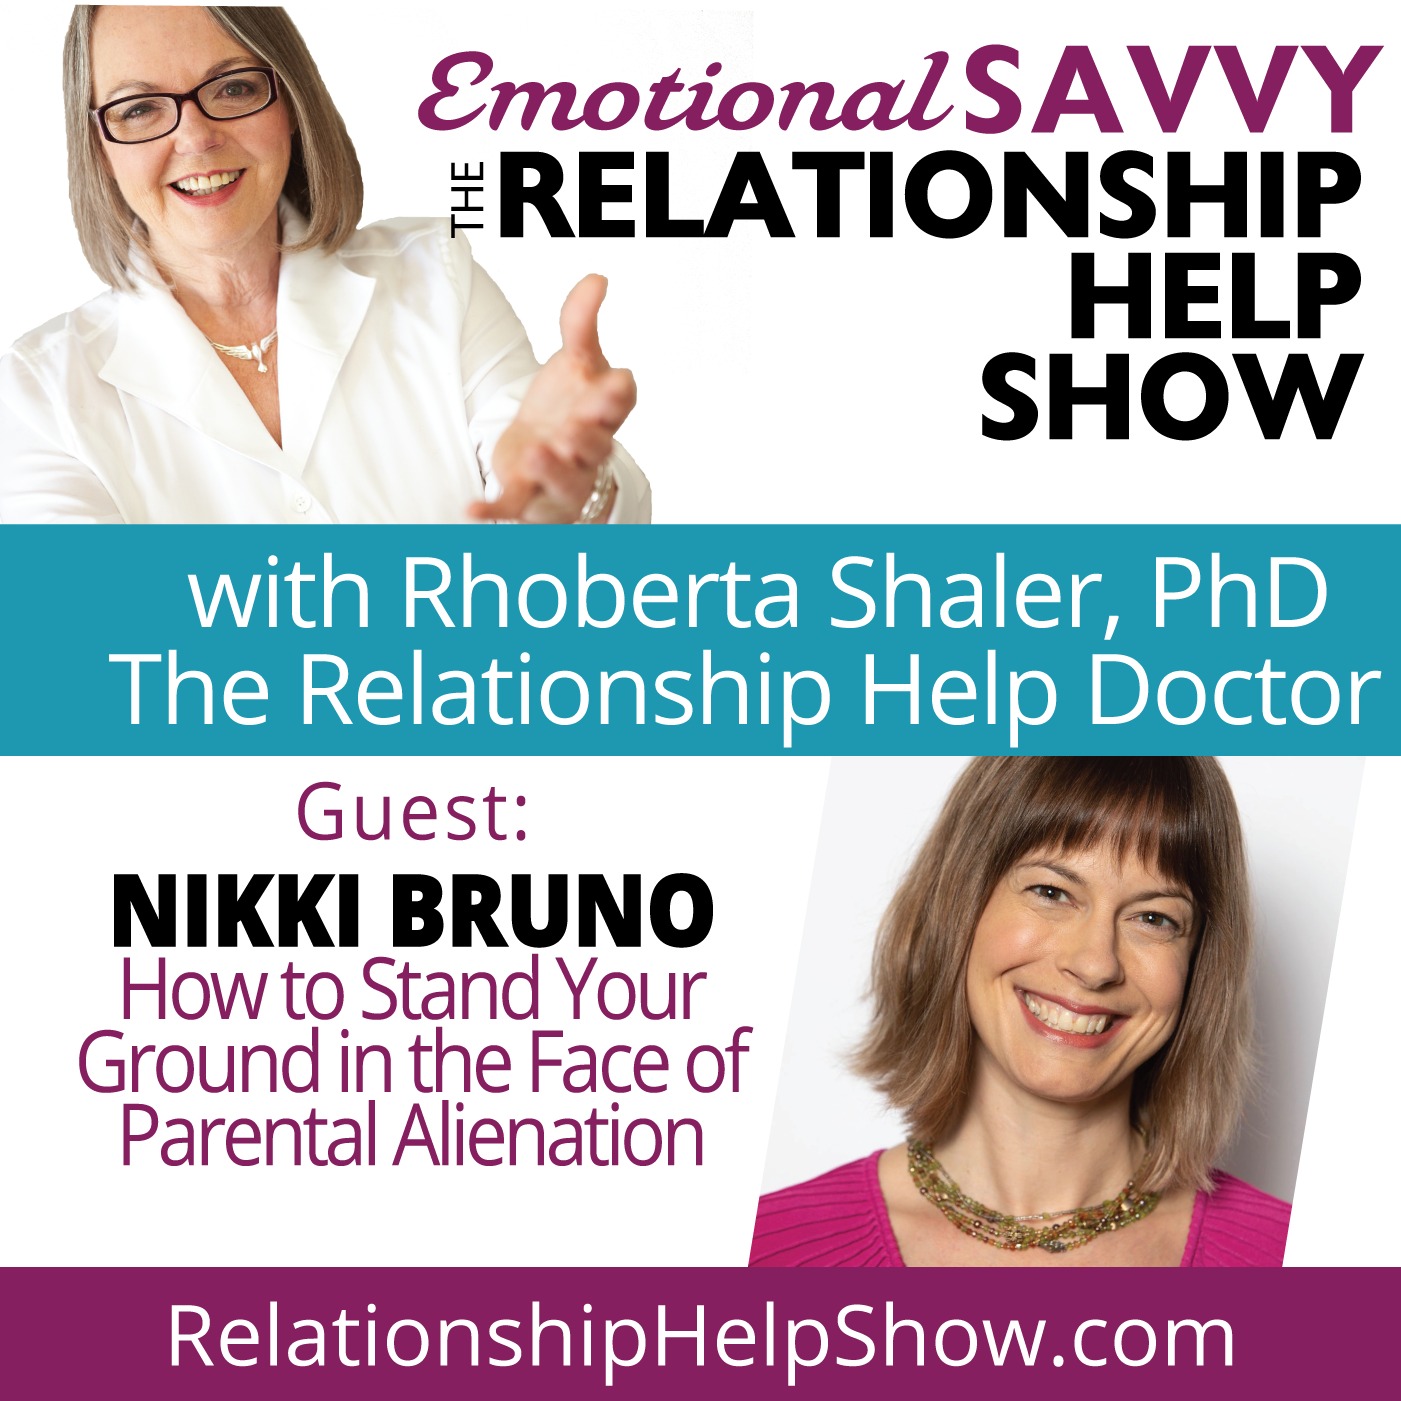 How to Stand Your Ground in the Face of Parental Alienation - GUEST: Nikki Bruno